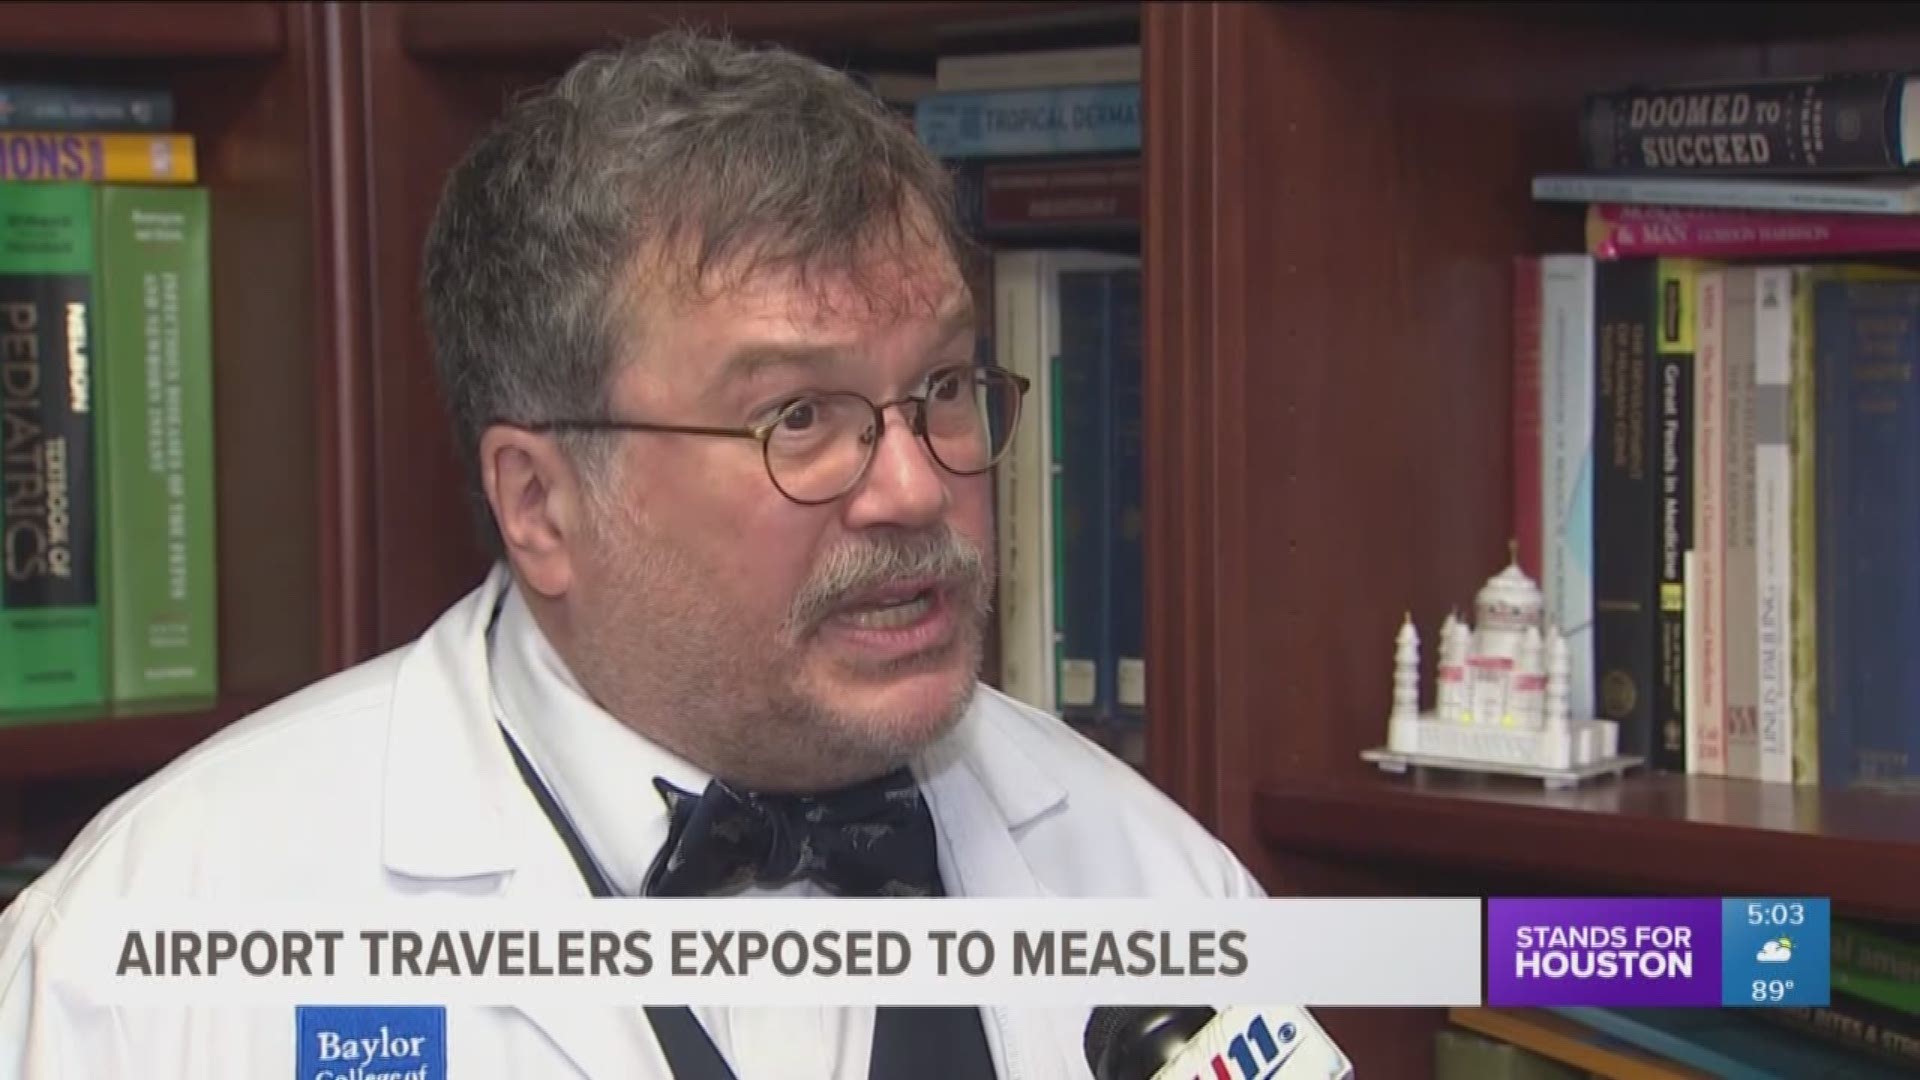 Southwest Airlines and the Houston Health Department are launching an investigation after an adult passenger with measles recently changed planes in Houston.